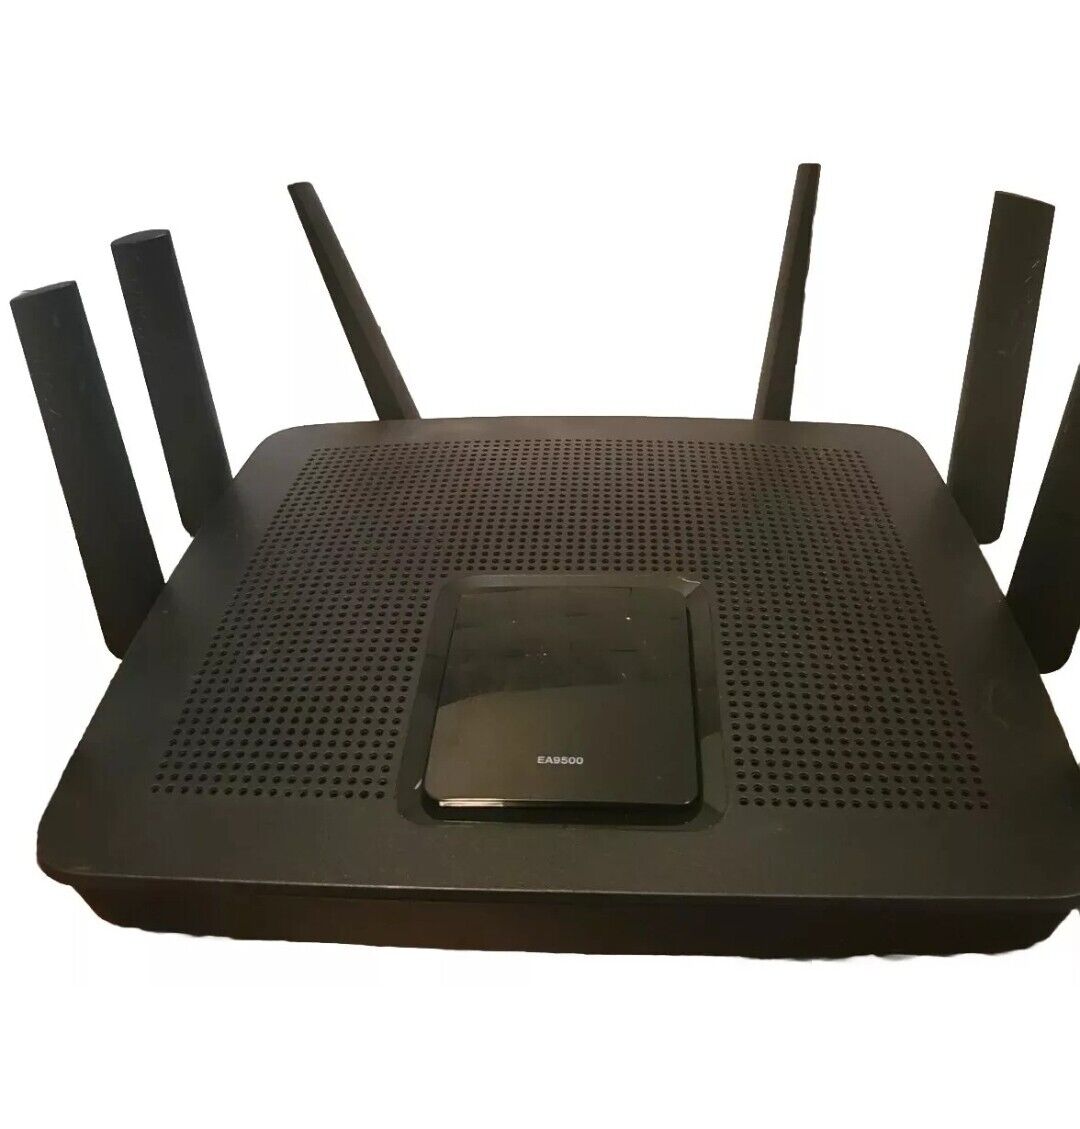 Linksys EA9500 V1.1 MAX-STREAM Gigabit Router, WiFi speeds up to 5.3 Gbp. READ